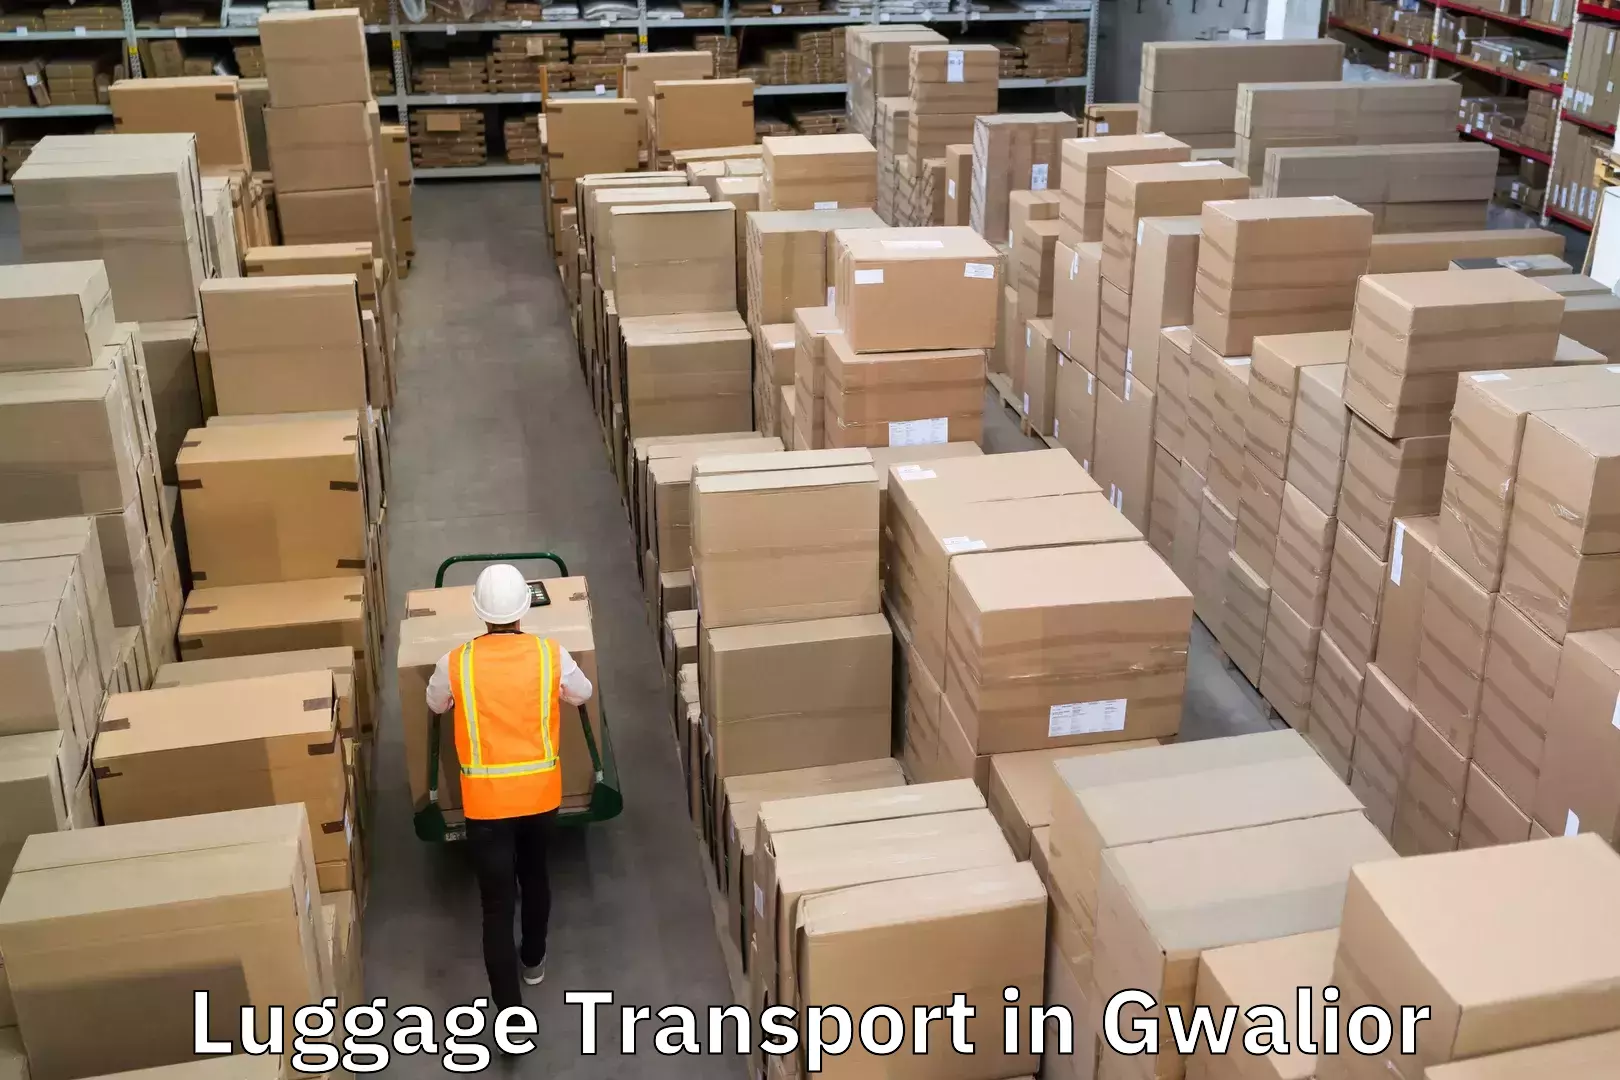 Baggage transport quote in Gwalior